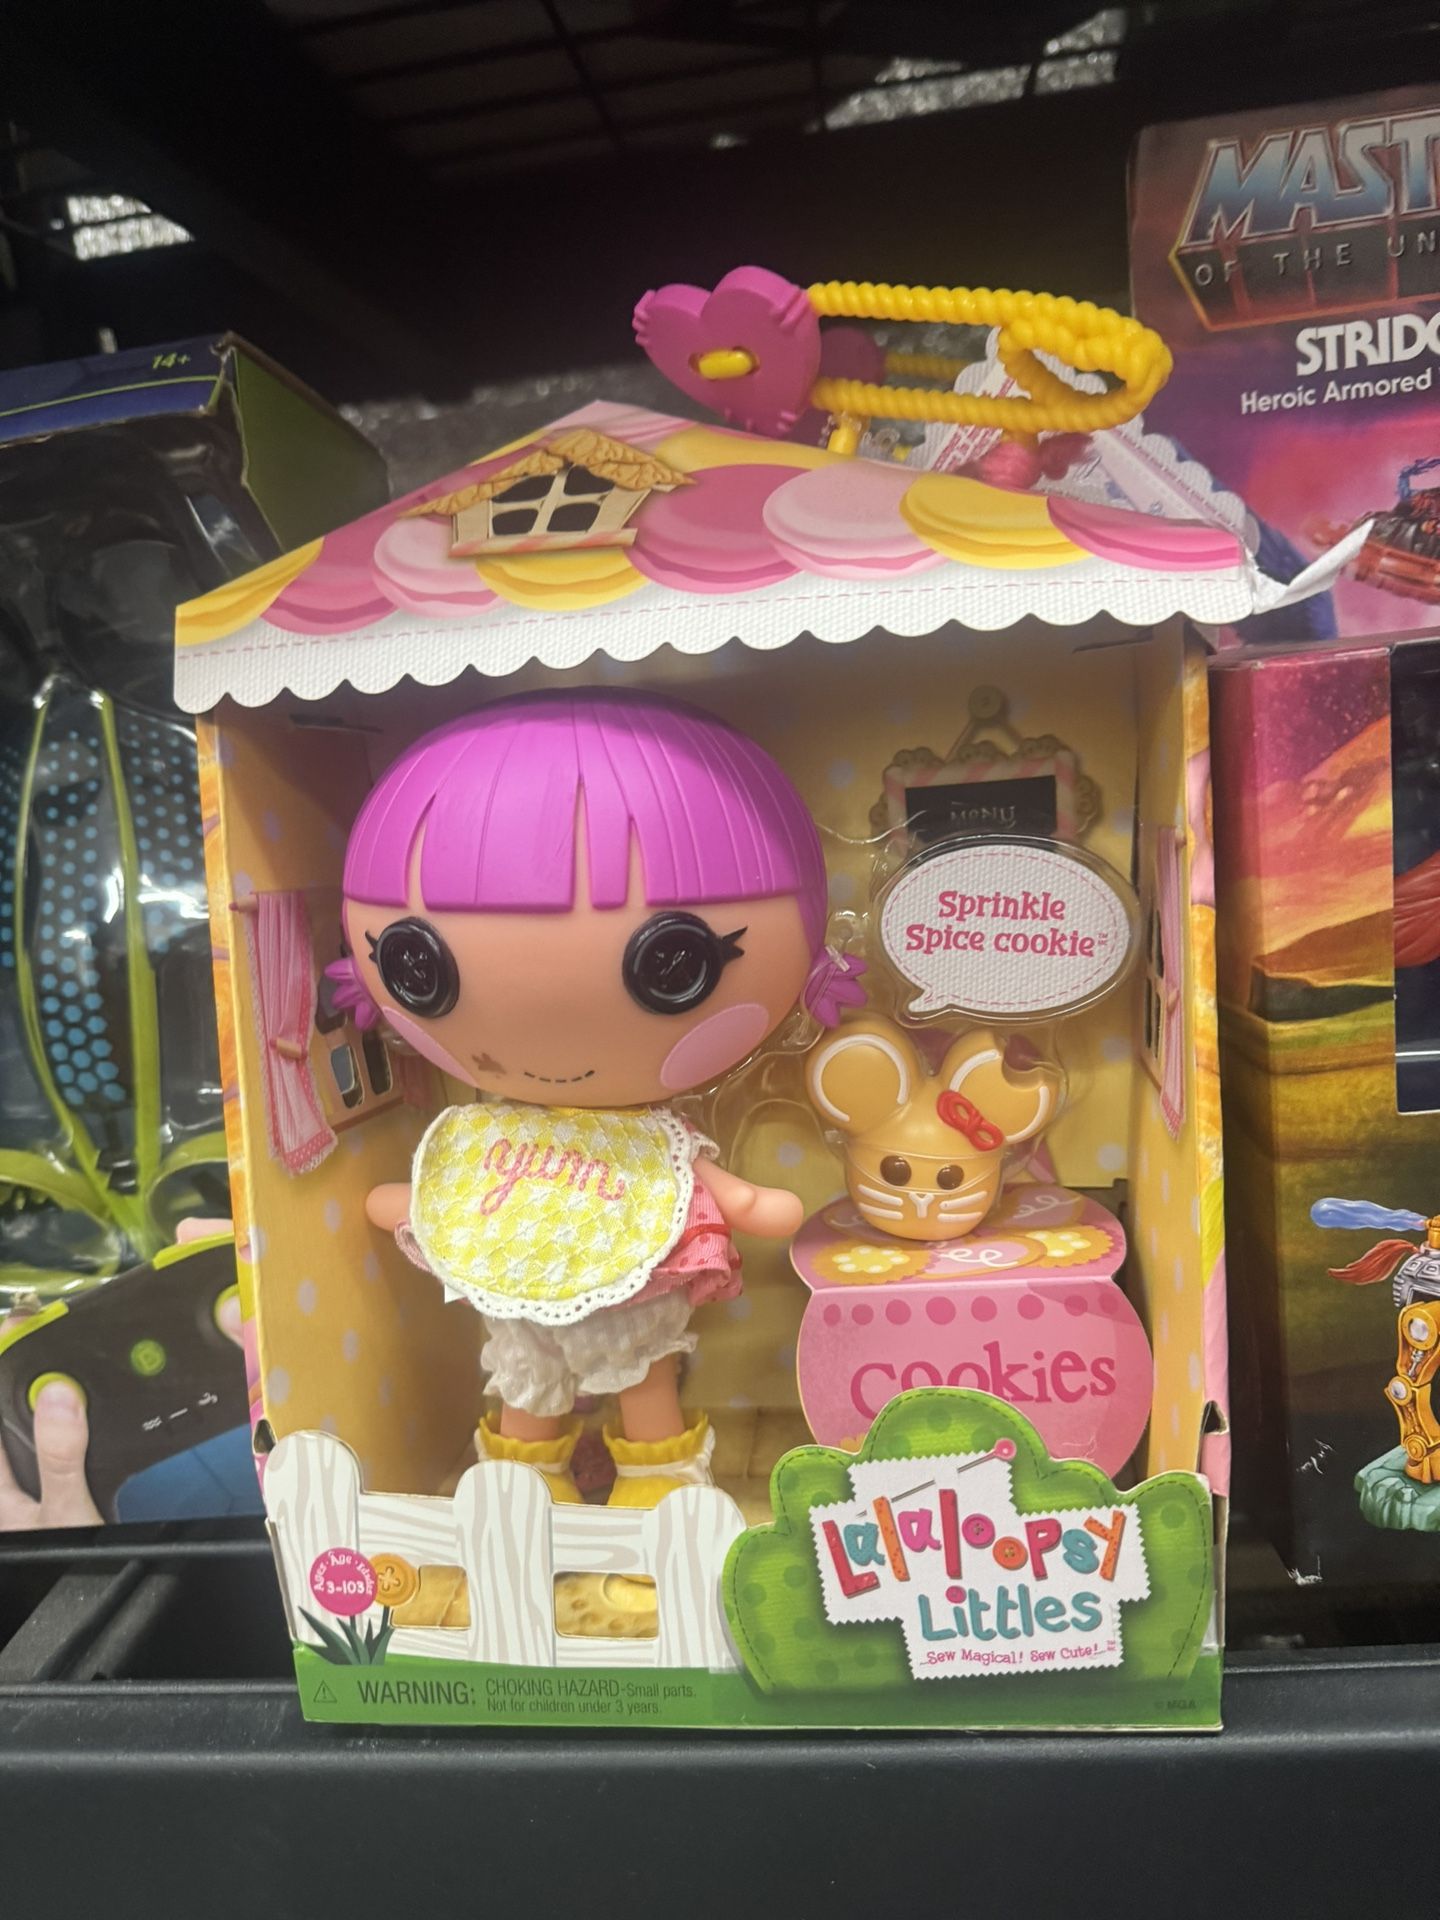 Lalaloopsy Sprinkle Spice Cookie Littles Doll $8